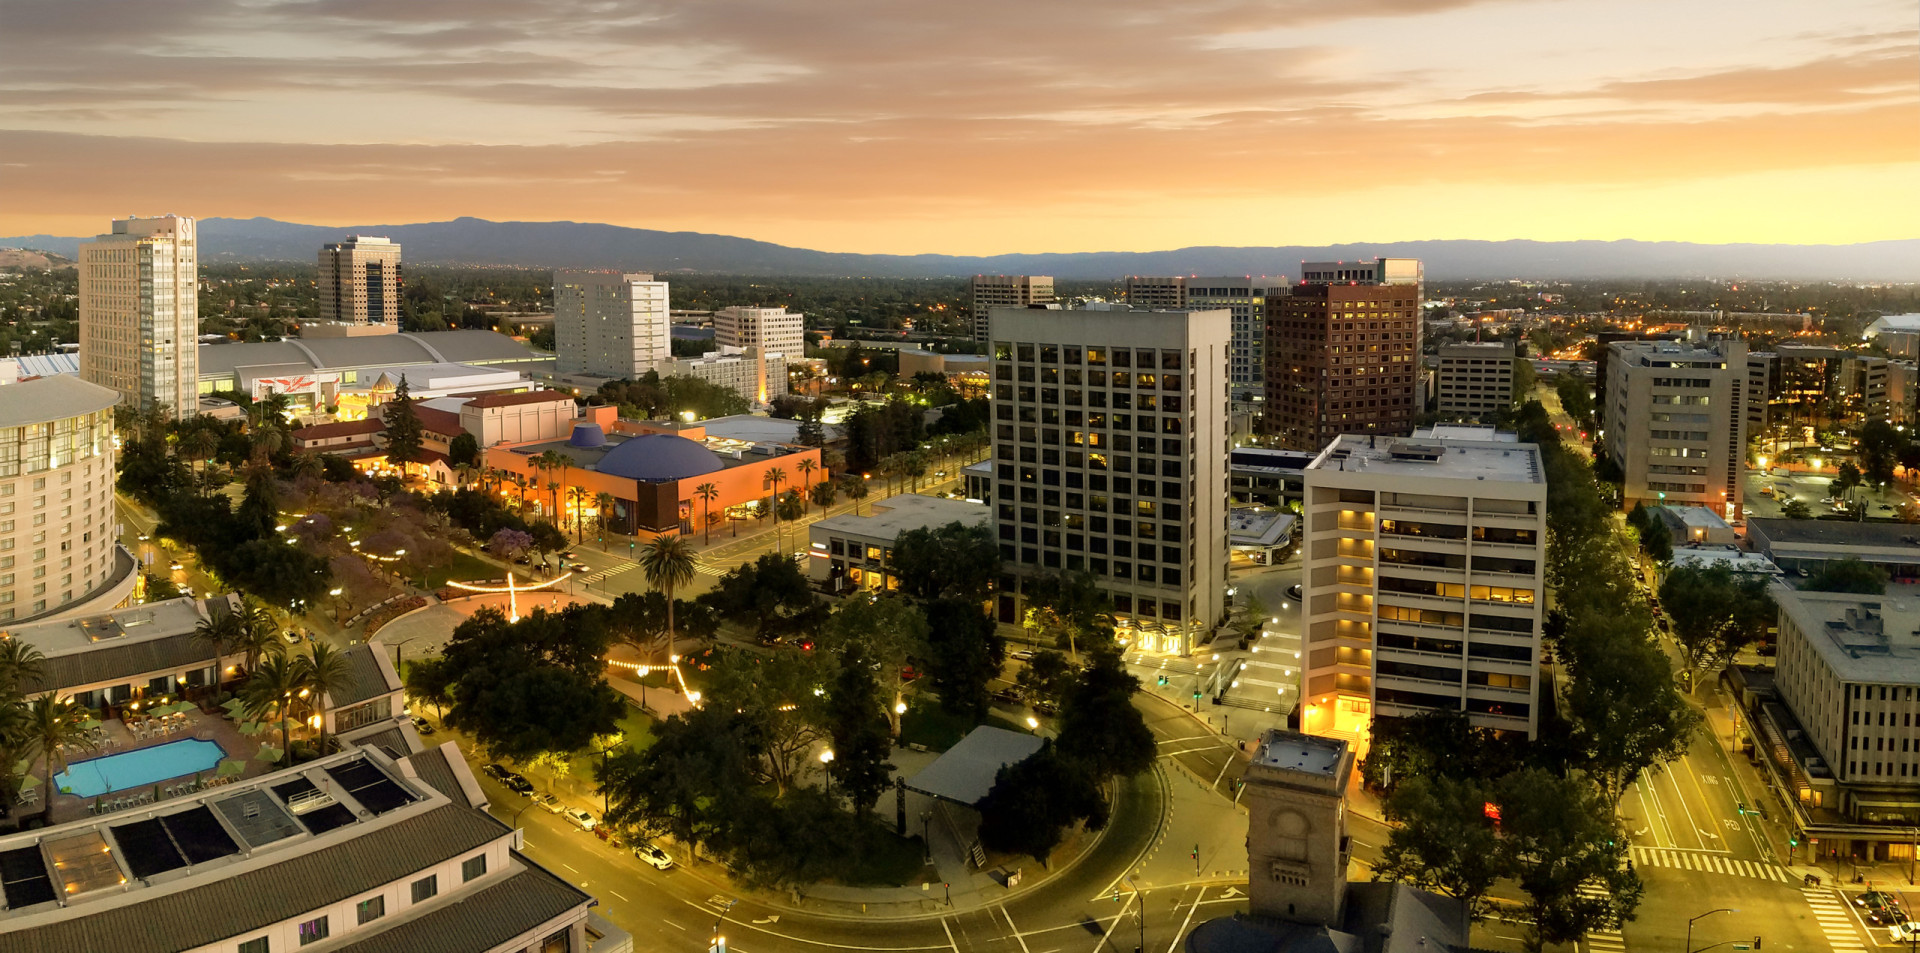 <p>Boasting a rent index of 74.2, San Jose is the heart of Silicon Valley. This city is a tech enthusiast’s dream, hosting numerous innovative firms, which contributes to its high living expenses.</p><p>You may also like:<a href="https://www.starsinsider.com/n/289785?utm_source=msn.com&utm_medium=display&utm_campaign=referral_description&utm_content=651794en-in"> Ejected: celebs who got kicked off flights</a></p>